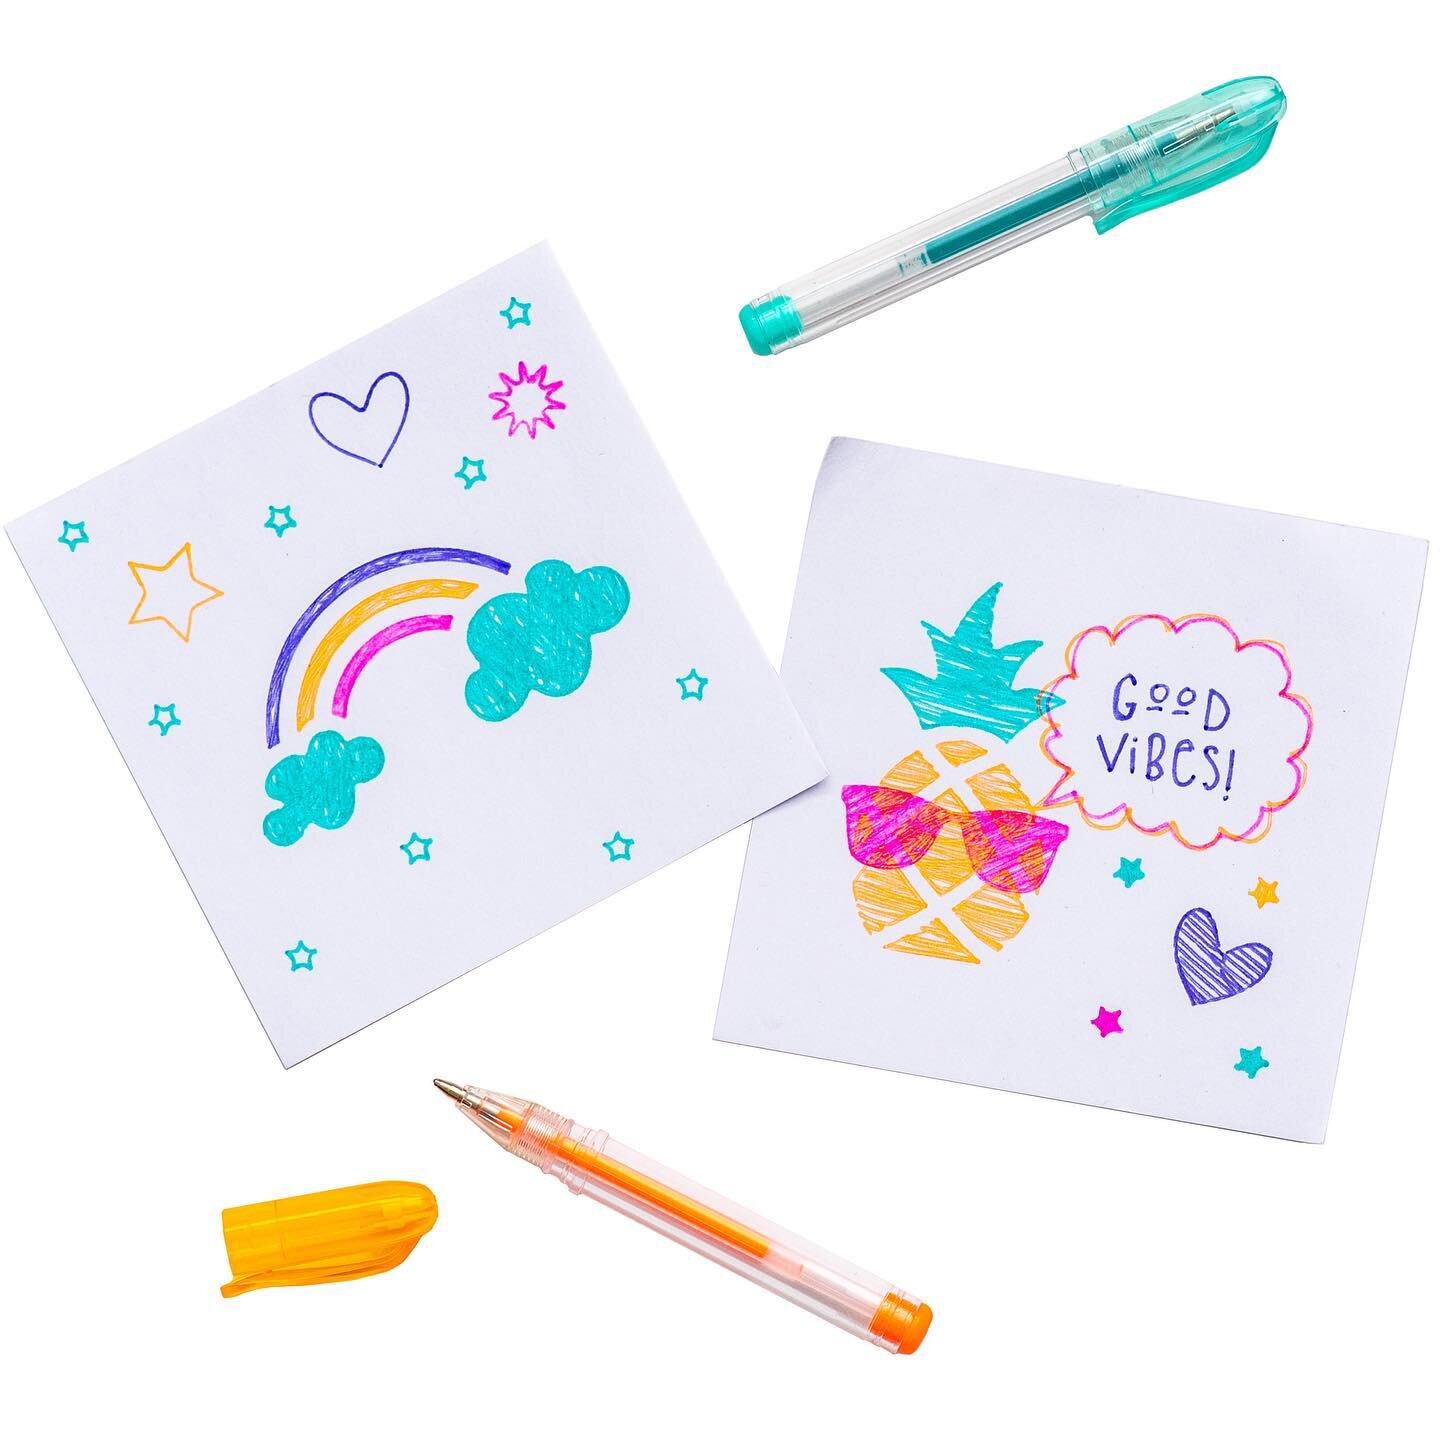 Check out our ✨NEW✨Mini Doodle Kit! Available @target in their front section today! 

💛Reusable Bag 
💛Fits in backpack or purse 
💛Only $3!!
💛Everything you need in one kit

#target #targetdeals #targetfinds #stockingstuffers #kids #kidsactivites 